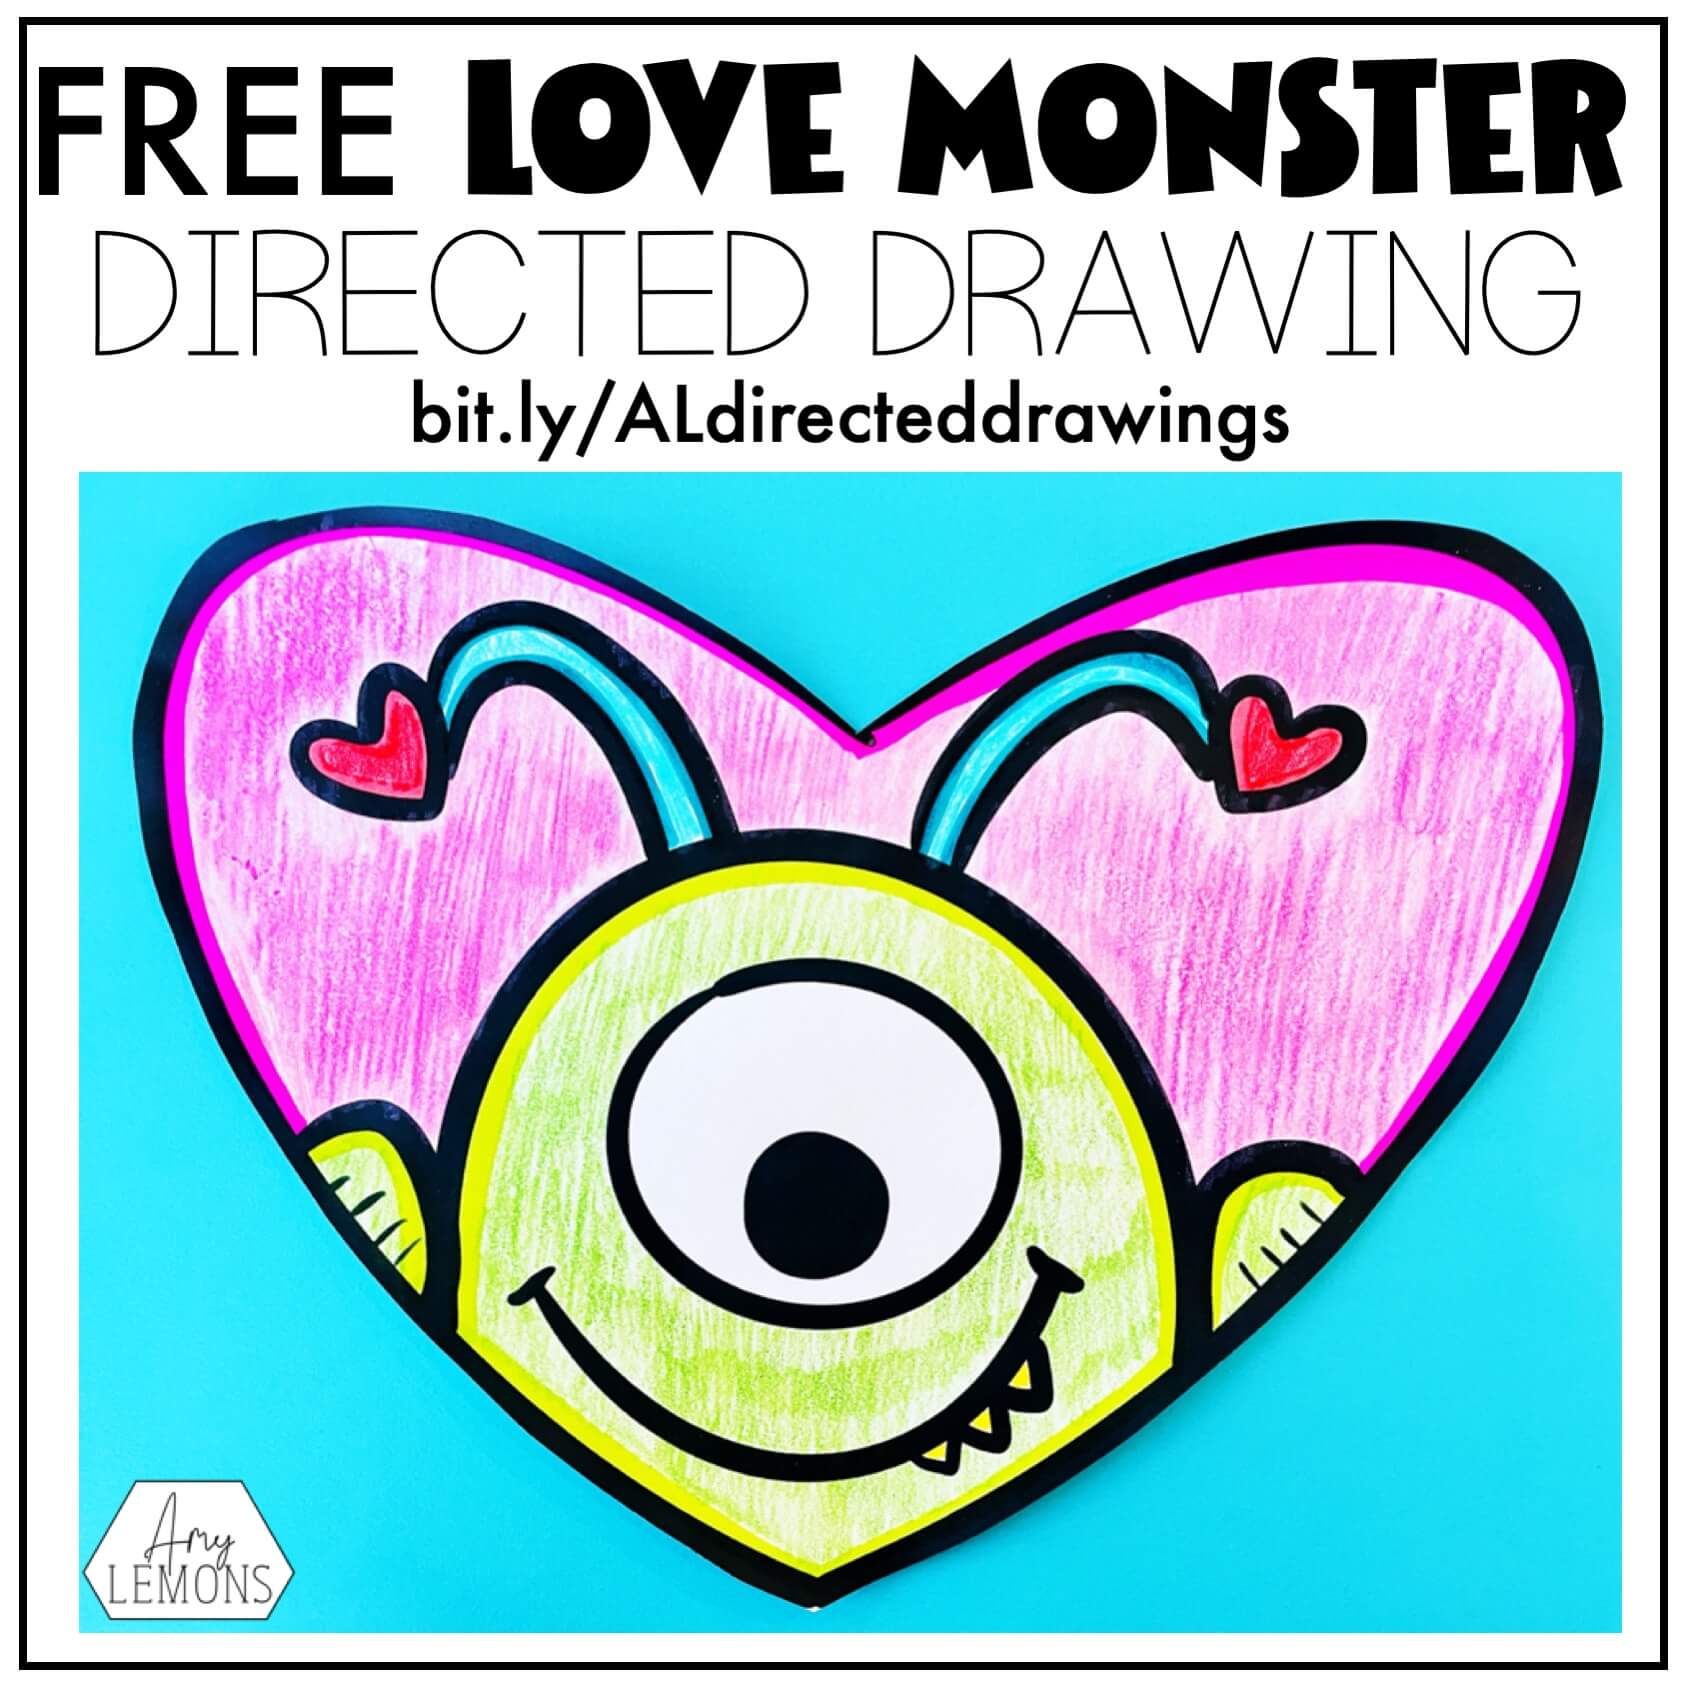 free directed drawing love monster